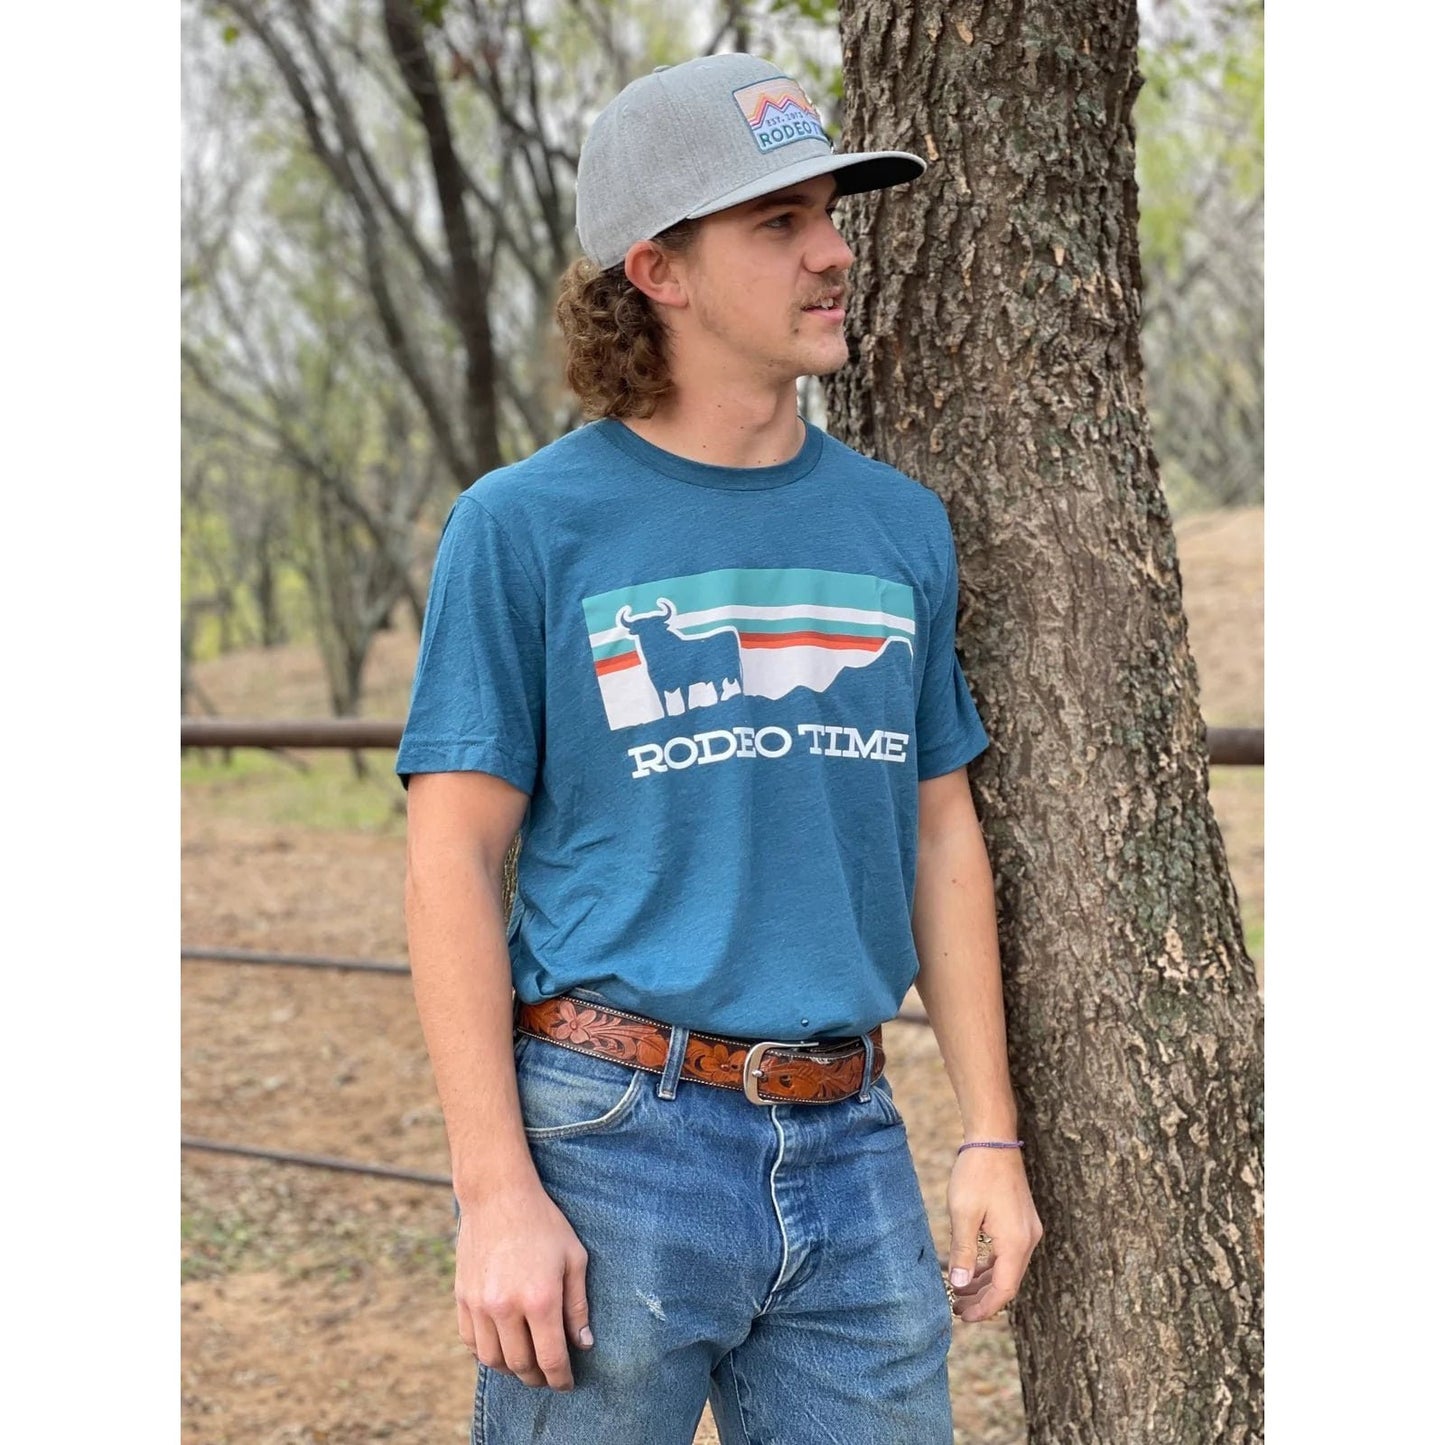 Dale Brisby Unisex T-Shirt Rodeo Time Sunset Teal/Cream T-125 - Dale Brisby